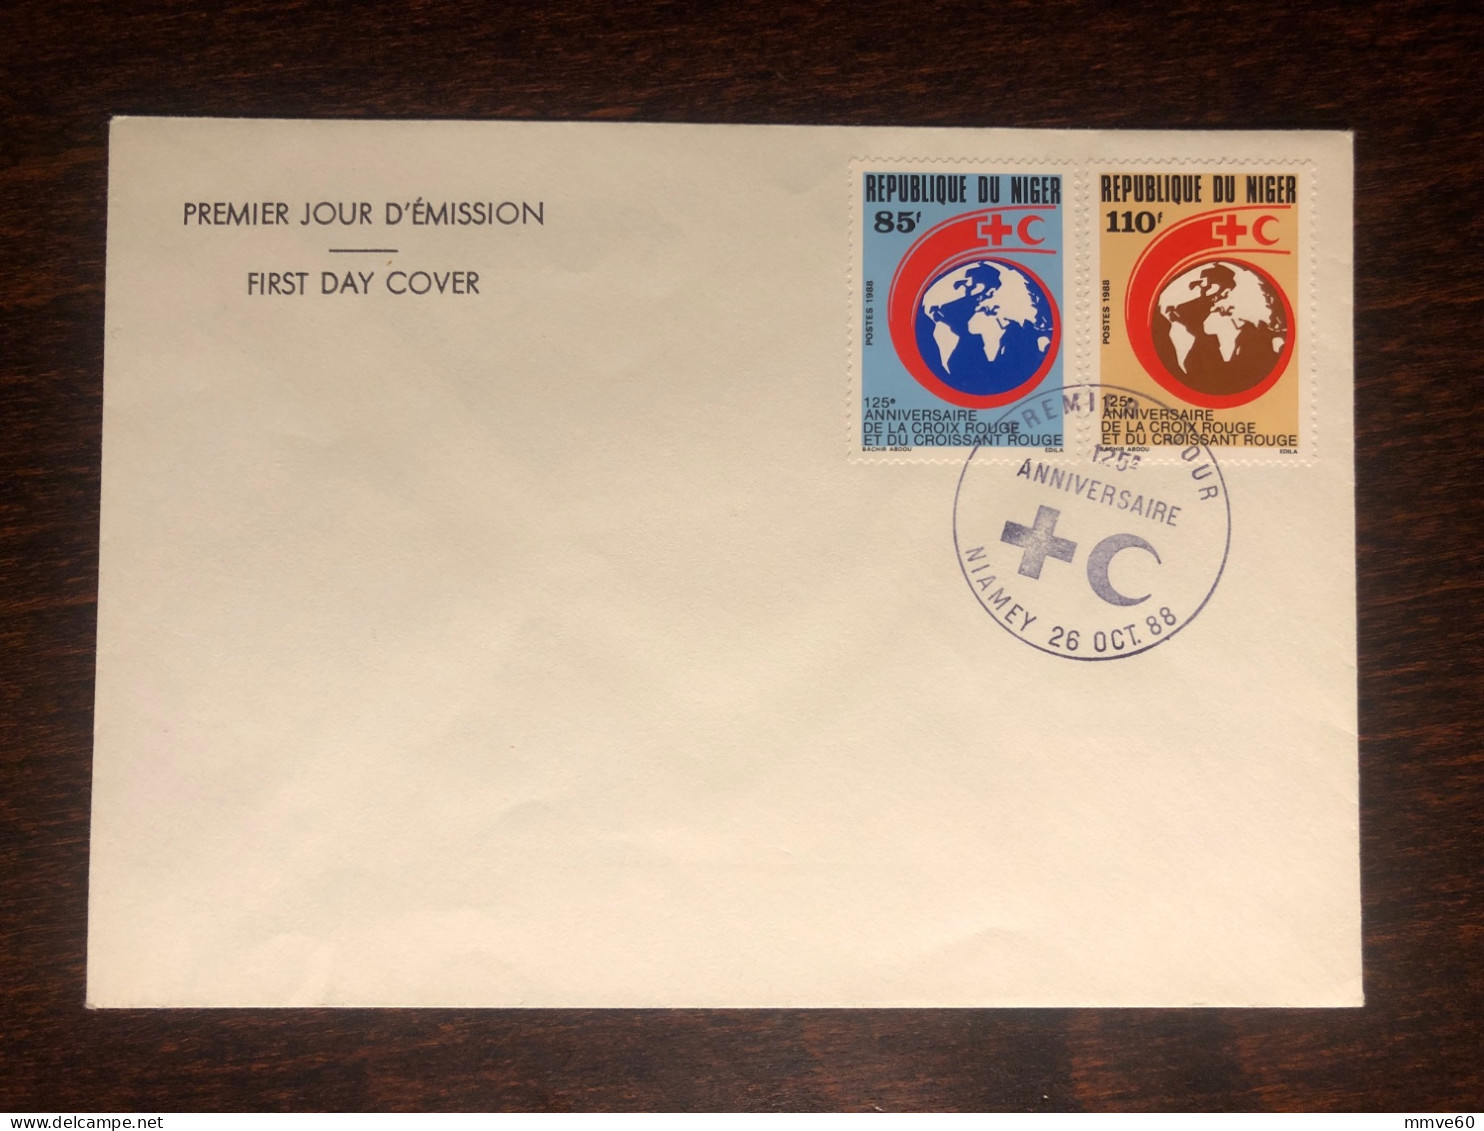 NIGER FDC COVER 1988 YEAR RED CROSS HEALTH MEDICINE STAMPS - Niger (1960-...)